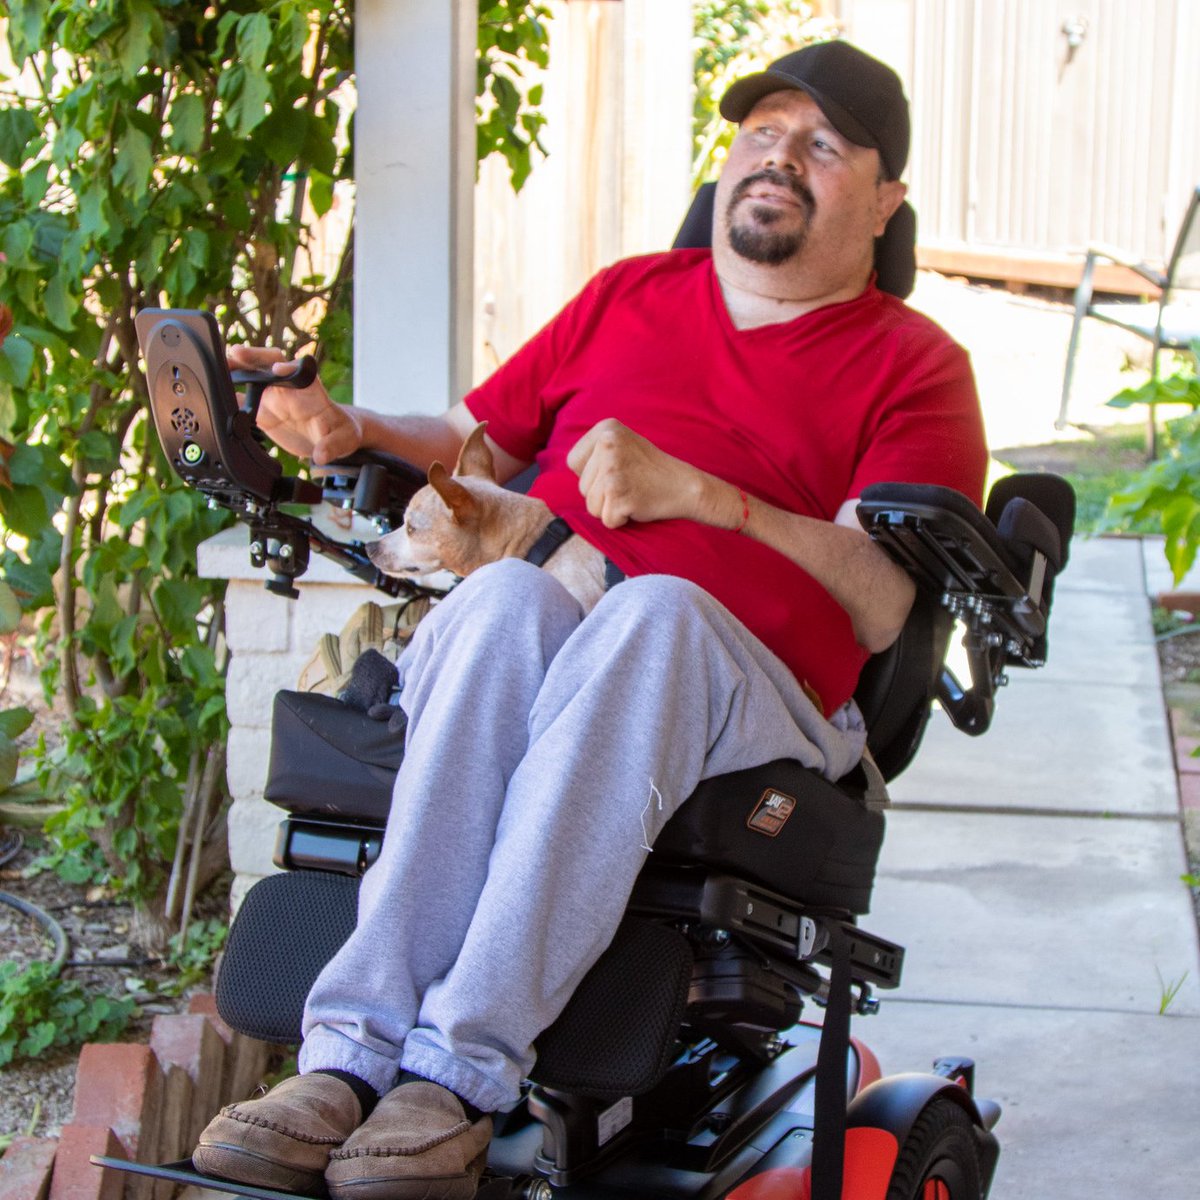 A heartwarming reunion! 🥰 @RedCrossCCR volunteers were excited to finally meet Ignacio, whose electric wheelchair they replaced after it was destroyed by floodwaters. Heavy rain and flooding impacted the central California area in December. One night, Ignacio and his brother